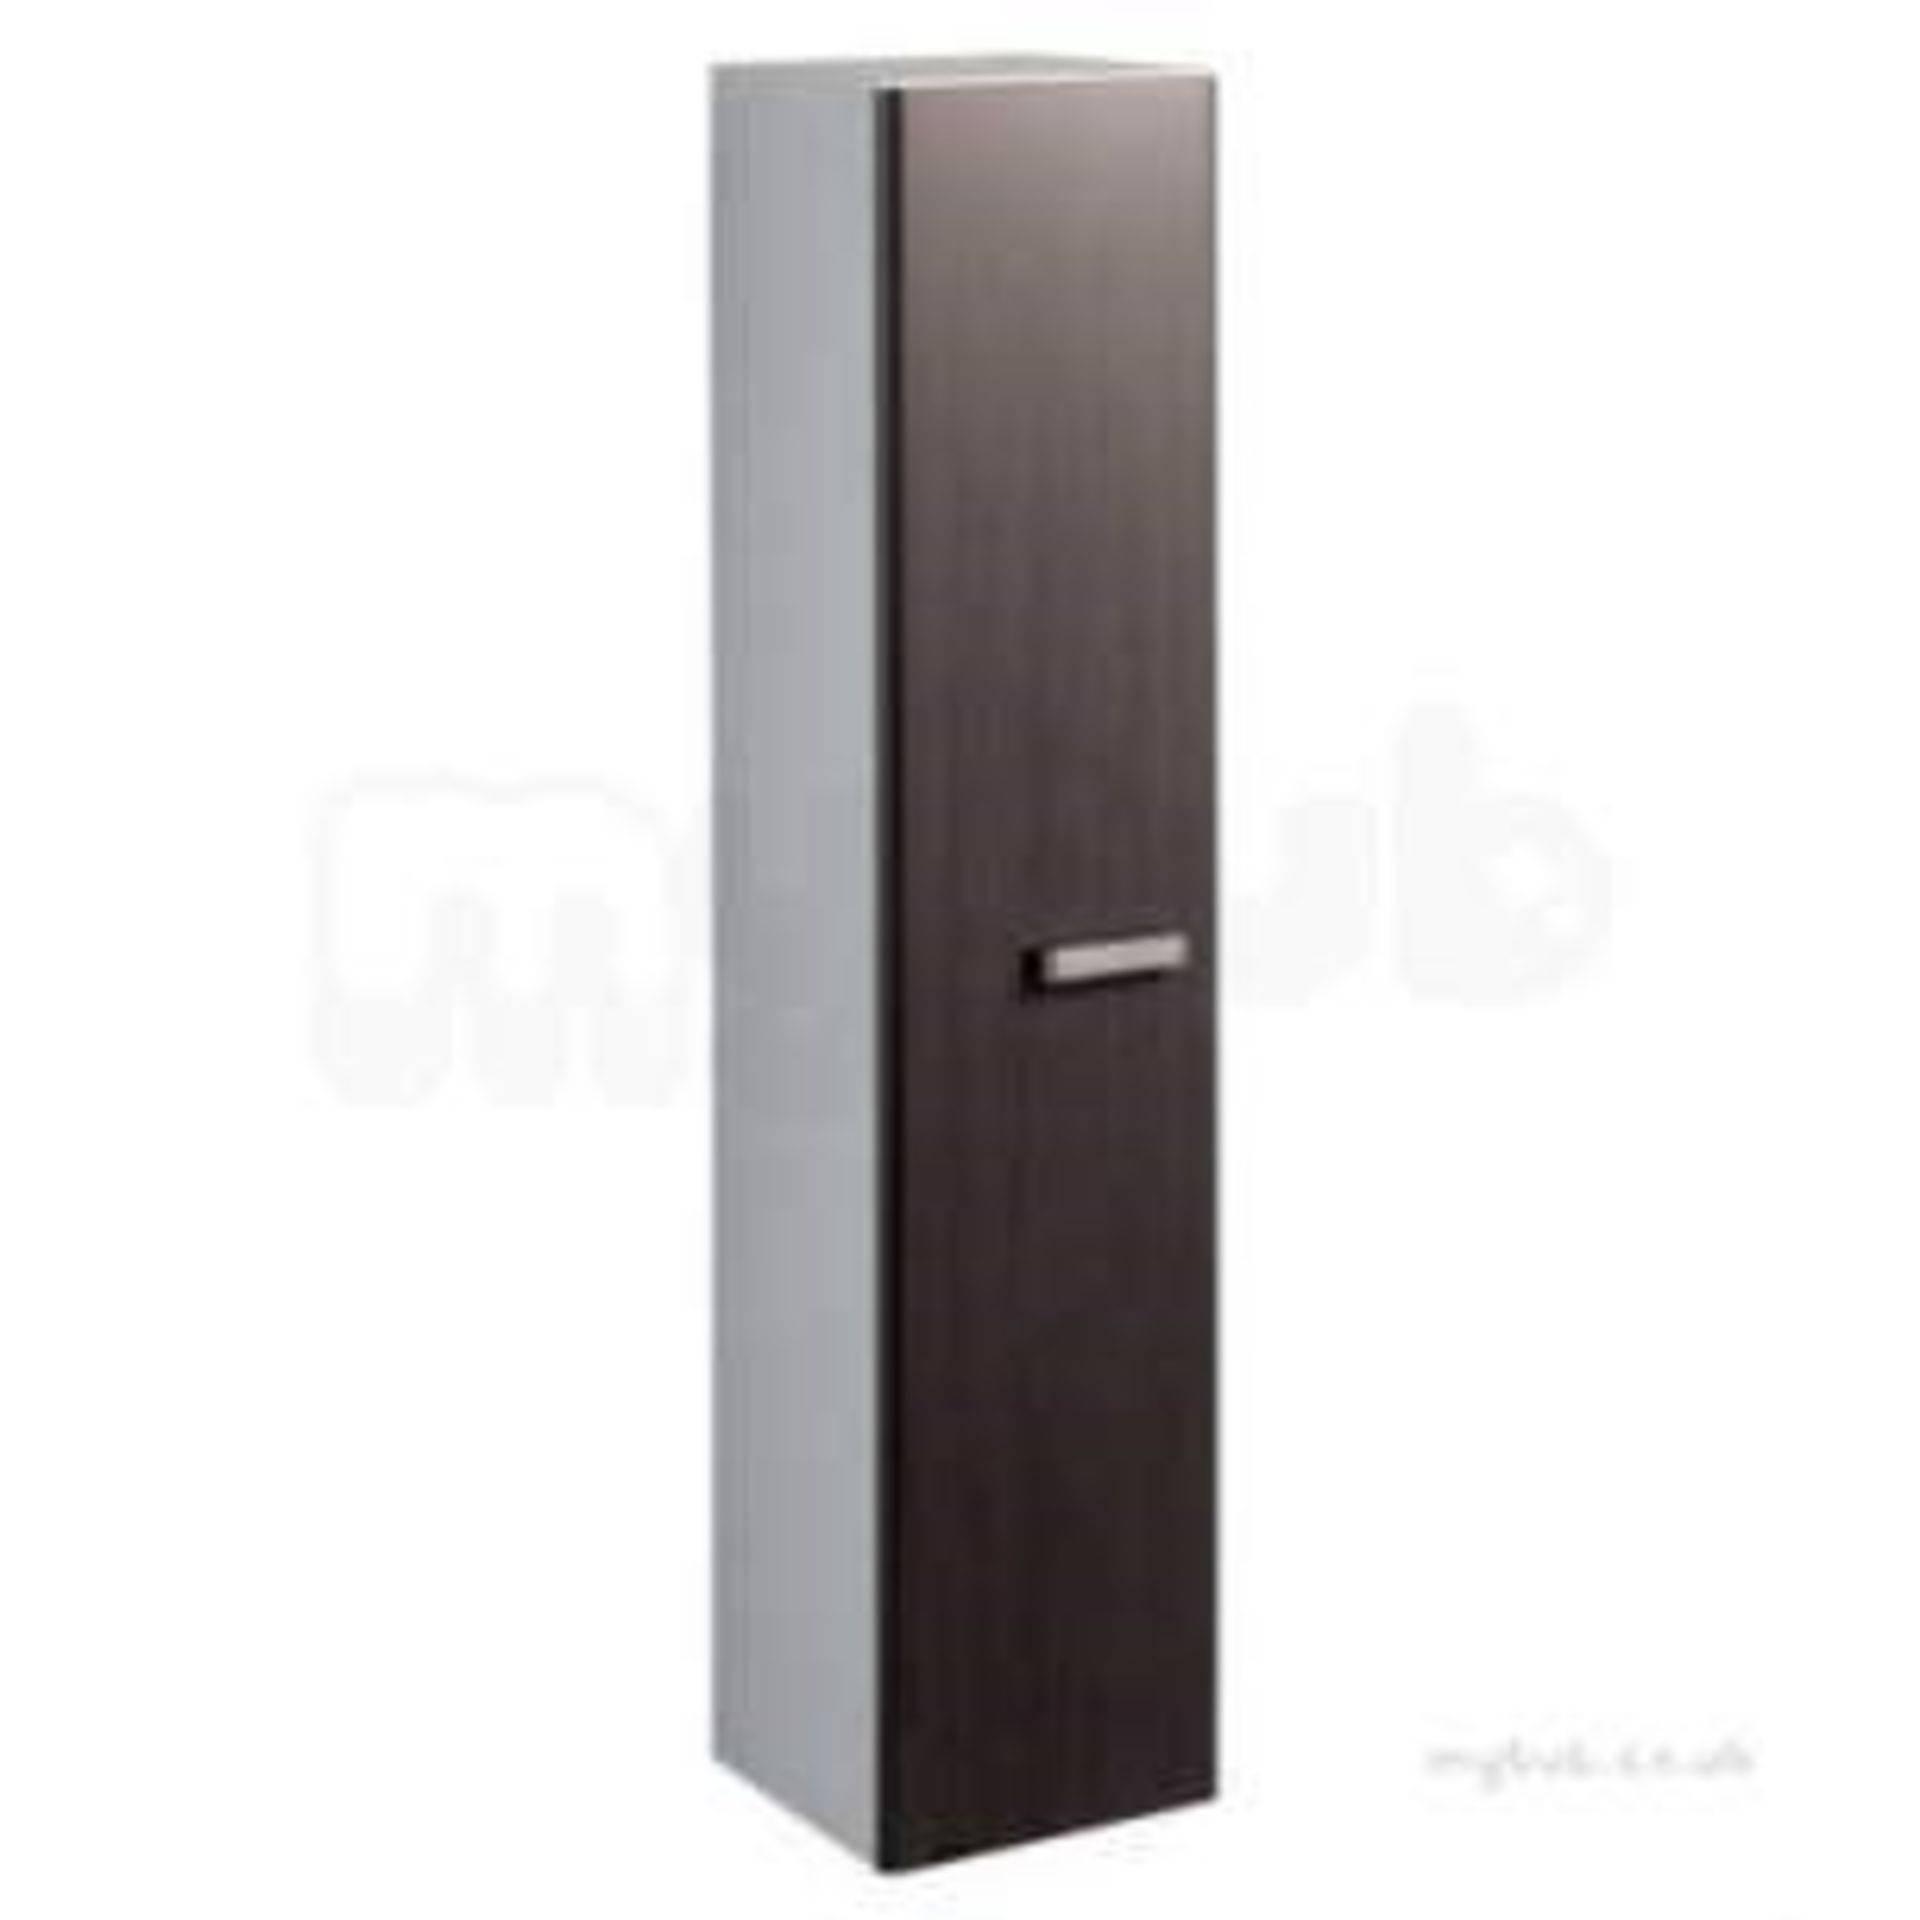 NEW (KN64) Twyford 1730mm Galerie Plan Wenge Tall Furniture Unit. RRP £666.... NEW (KN64)